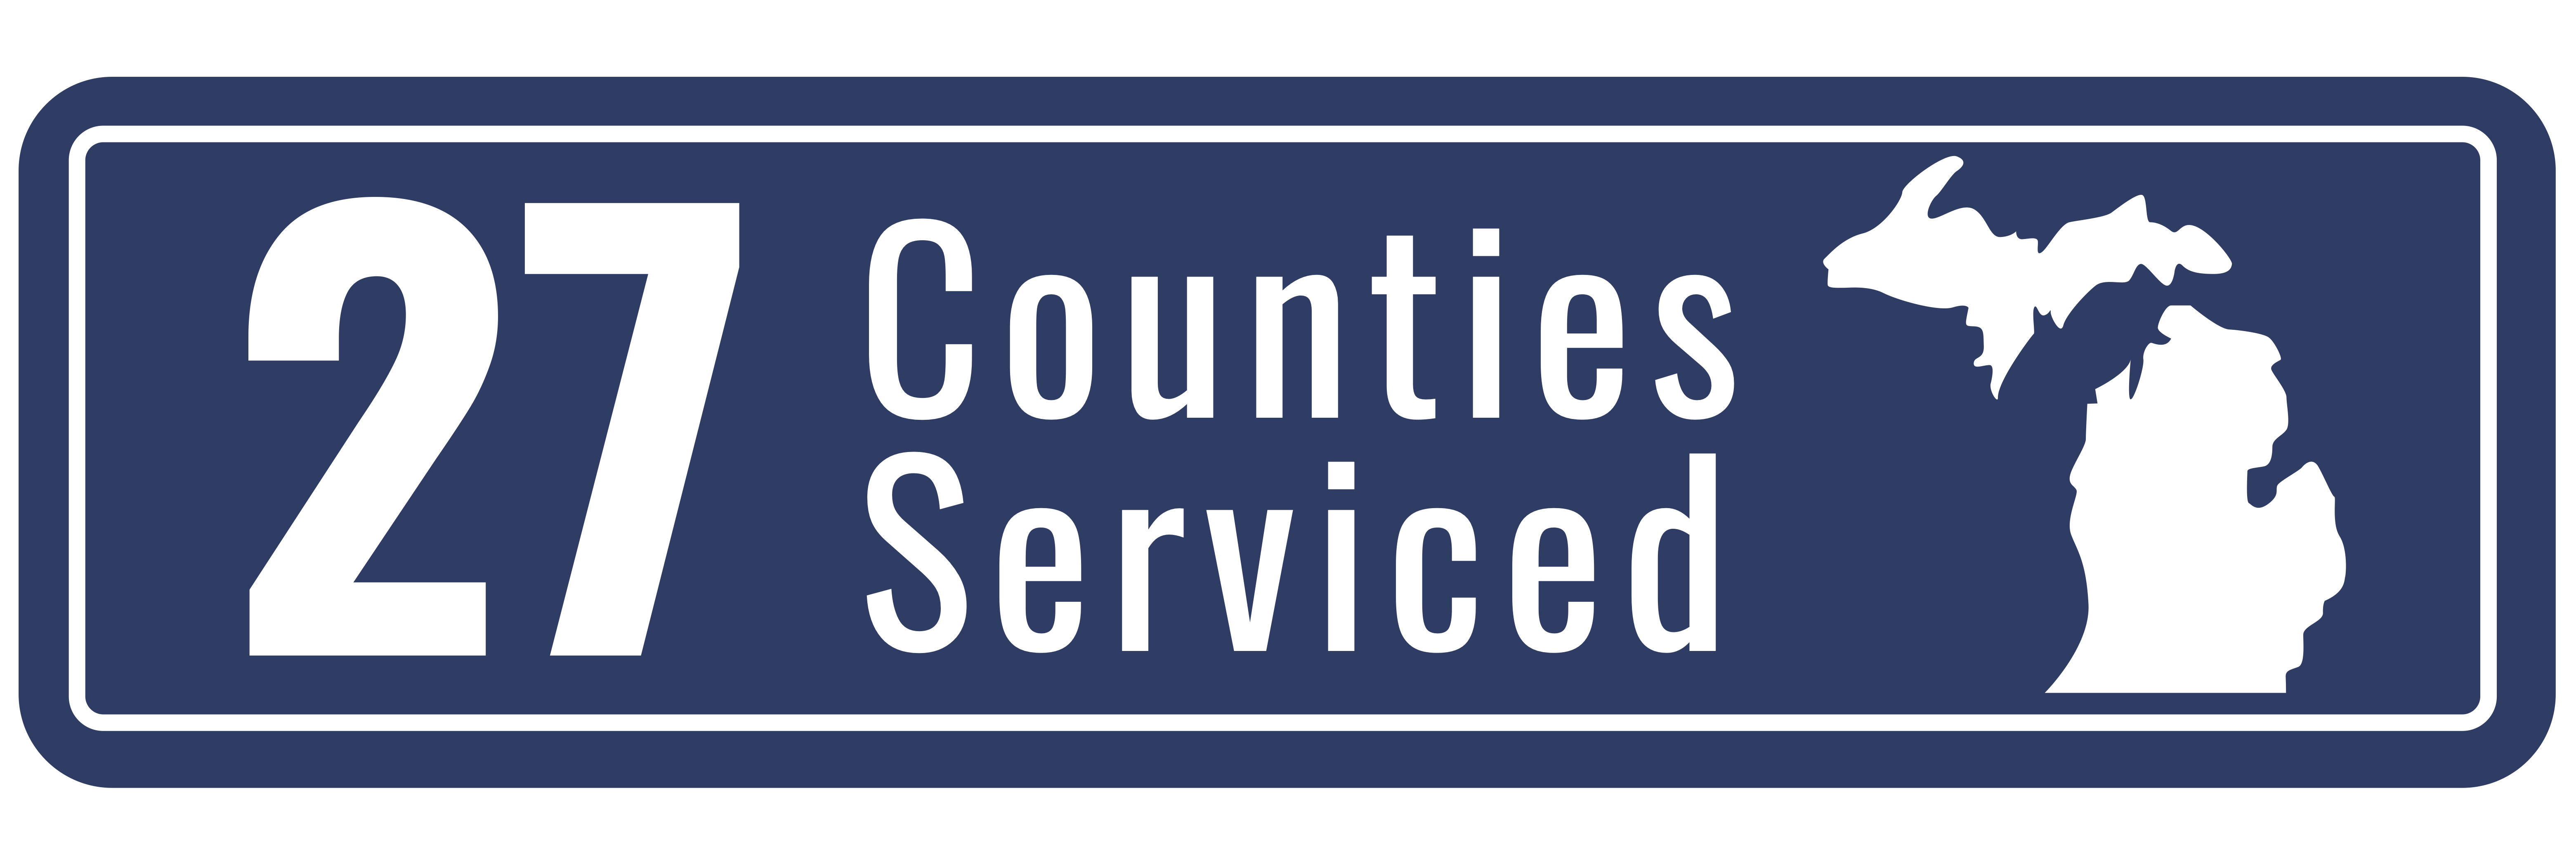 Blue Box Graphic: "27 Counties Serviced"